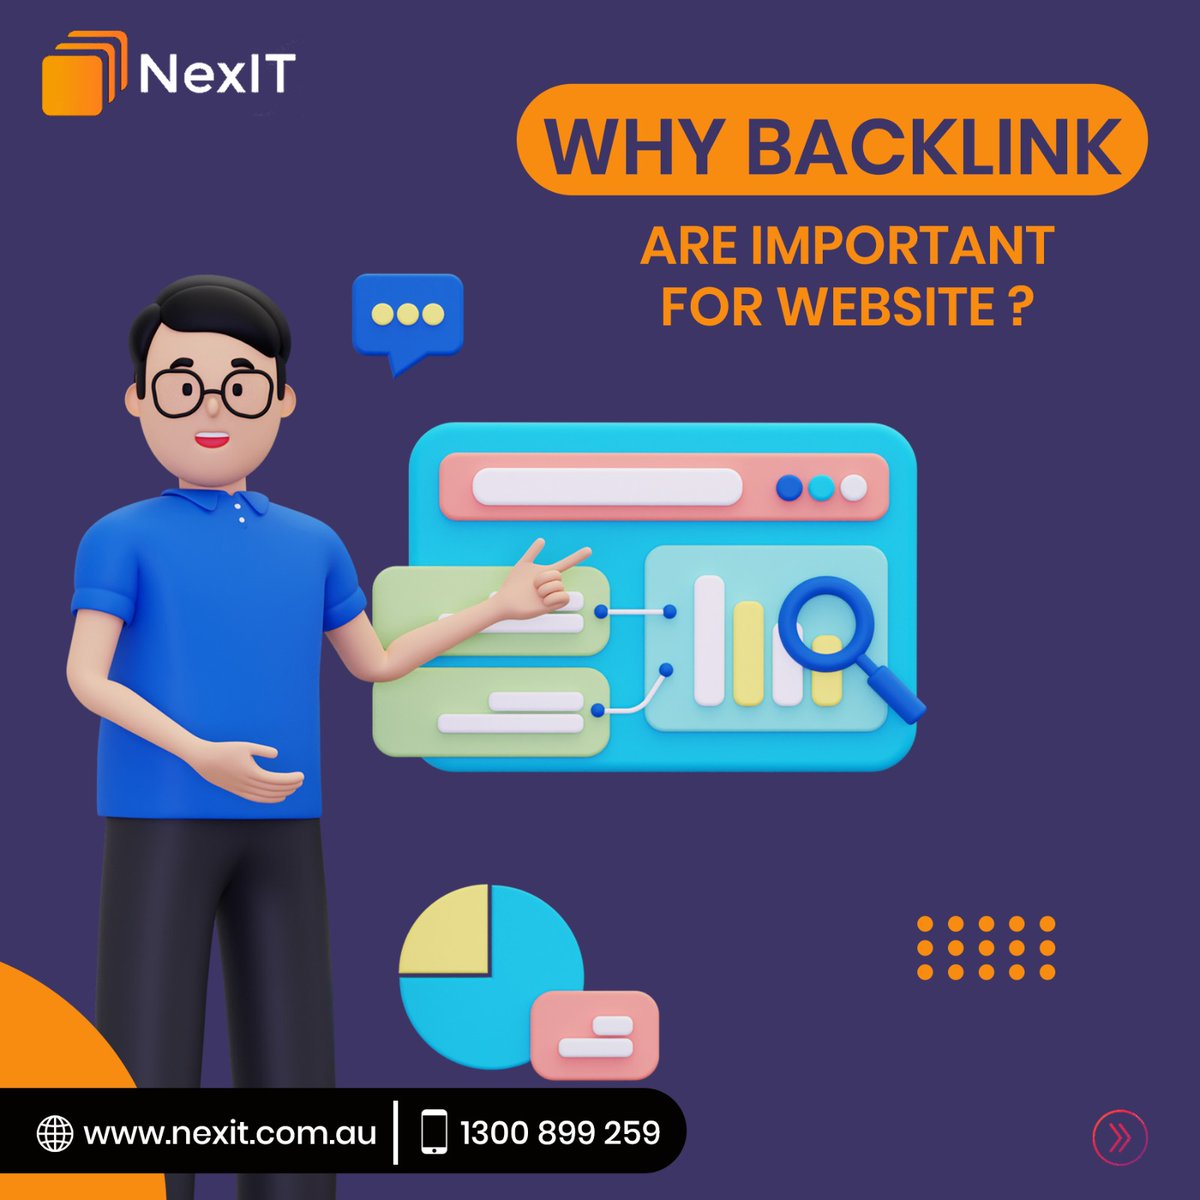 Why backlink are important for website?